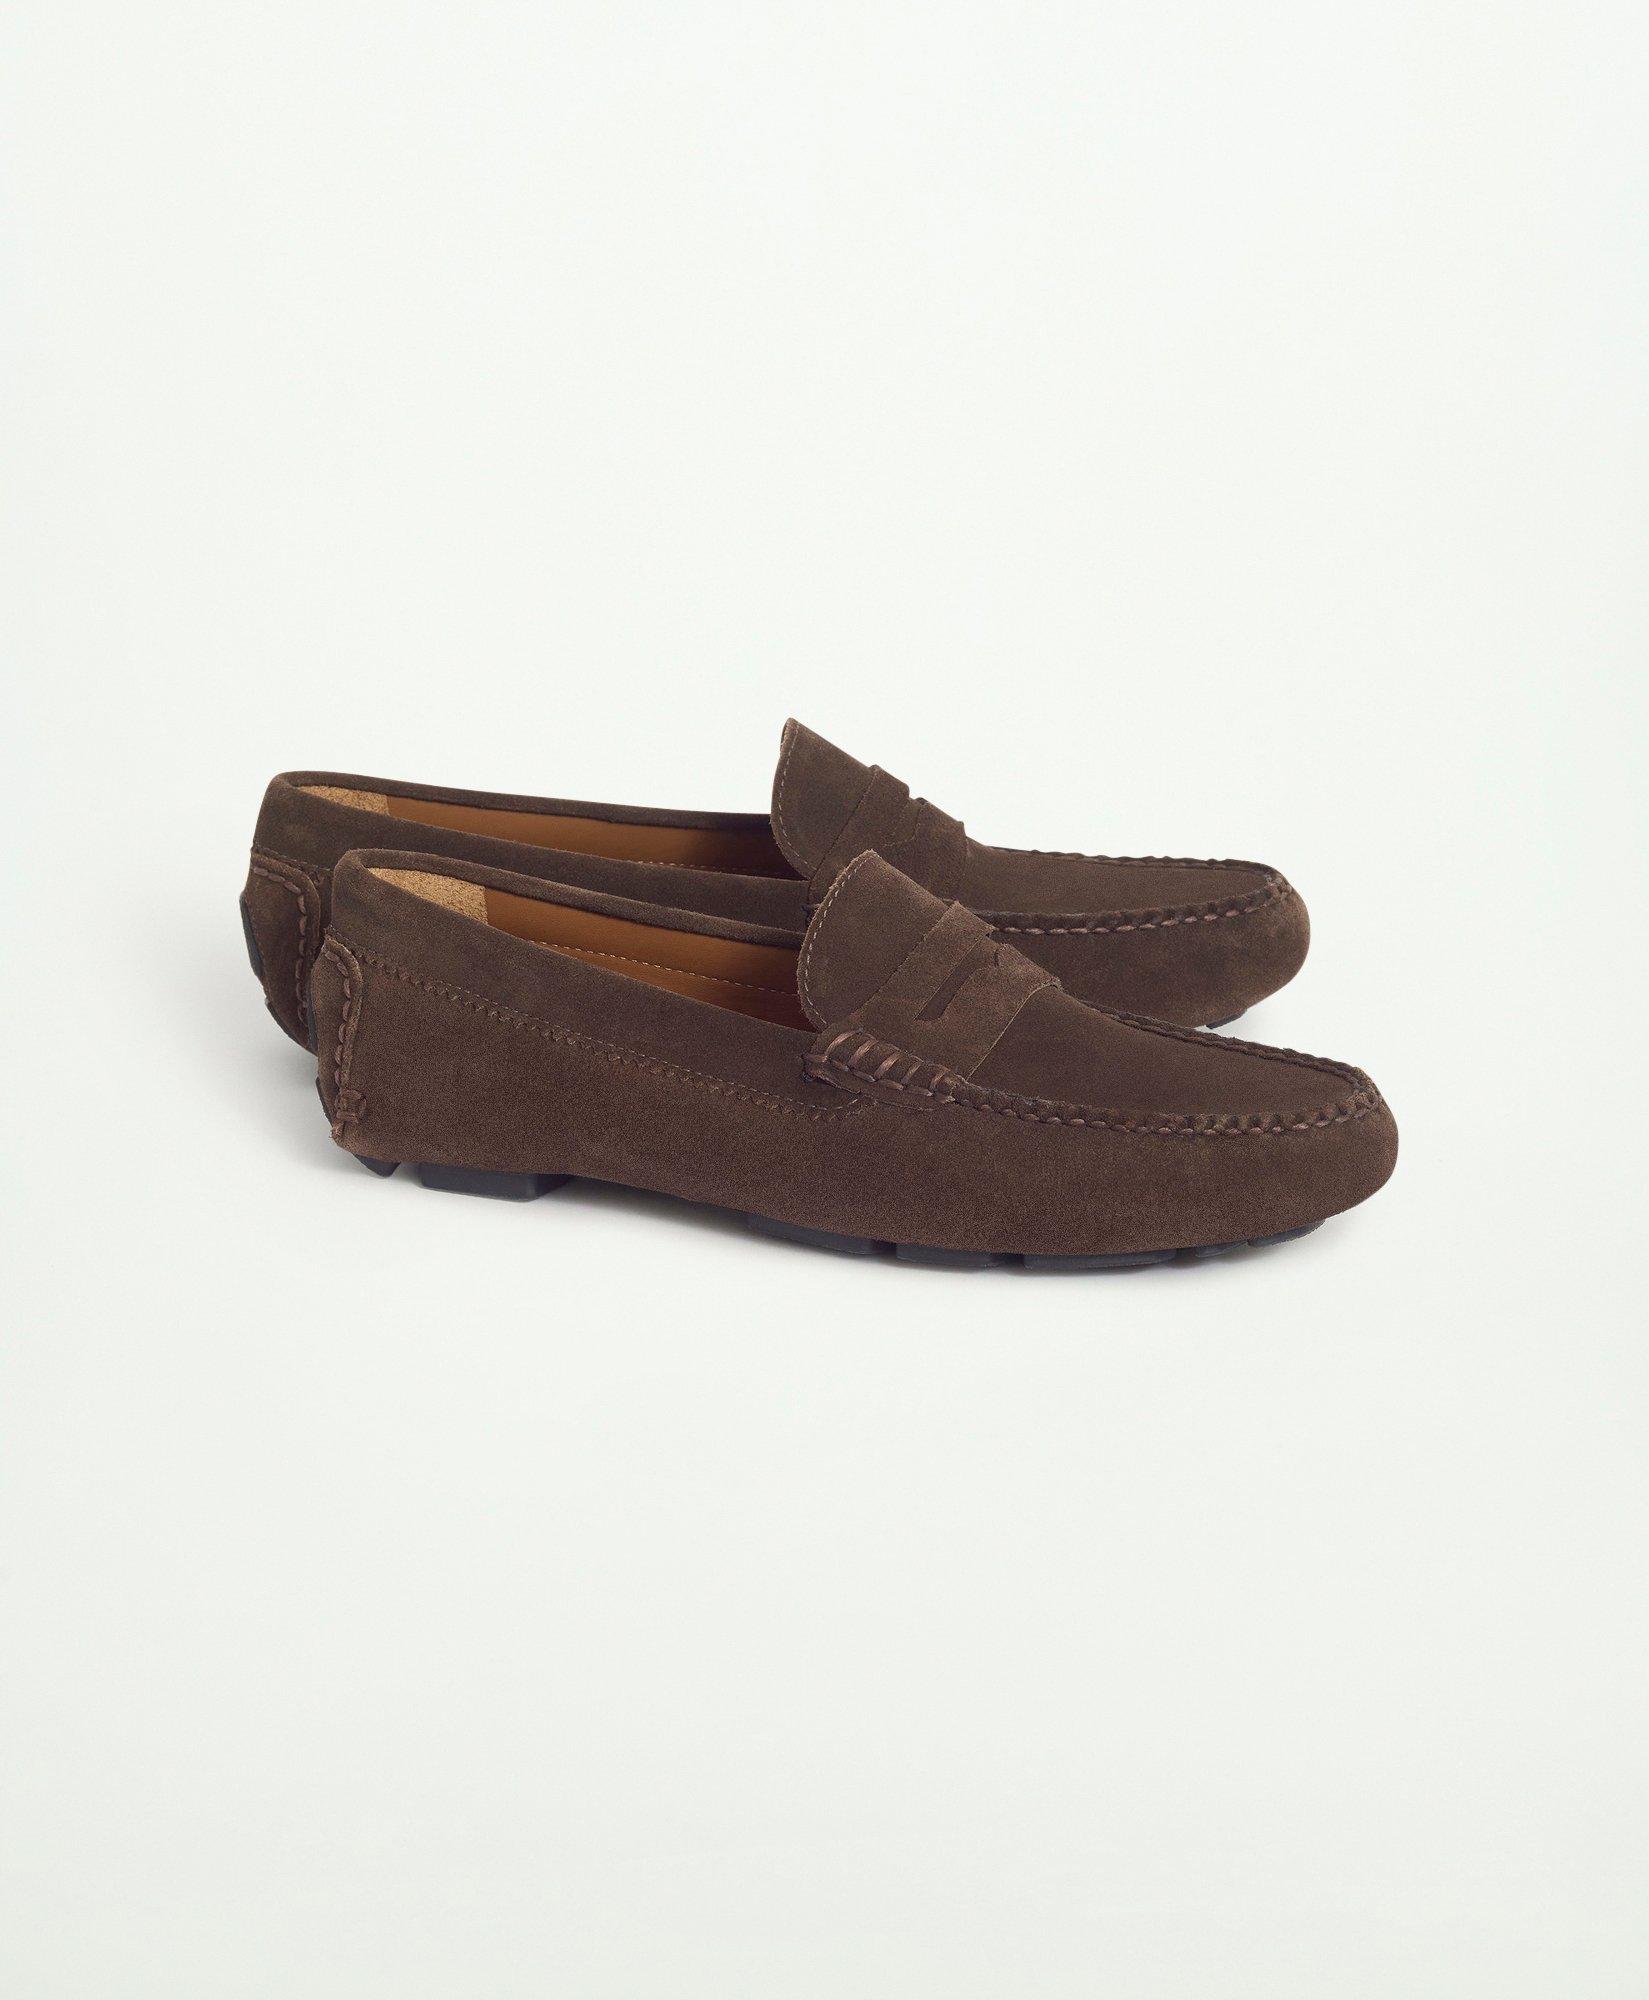 Brooks Brothers Bellport Driving Moc Shoes | Brown | Size 11½ D